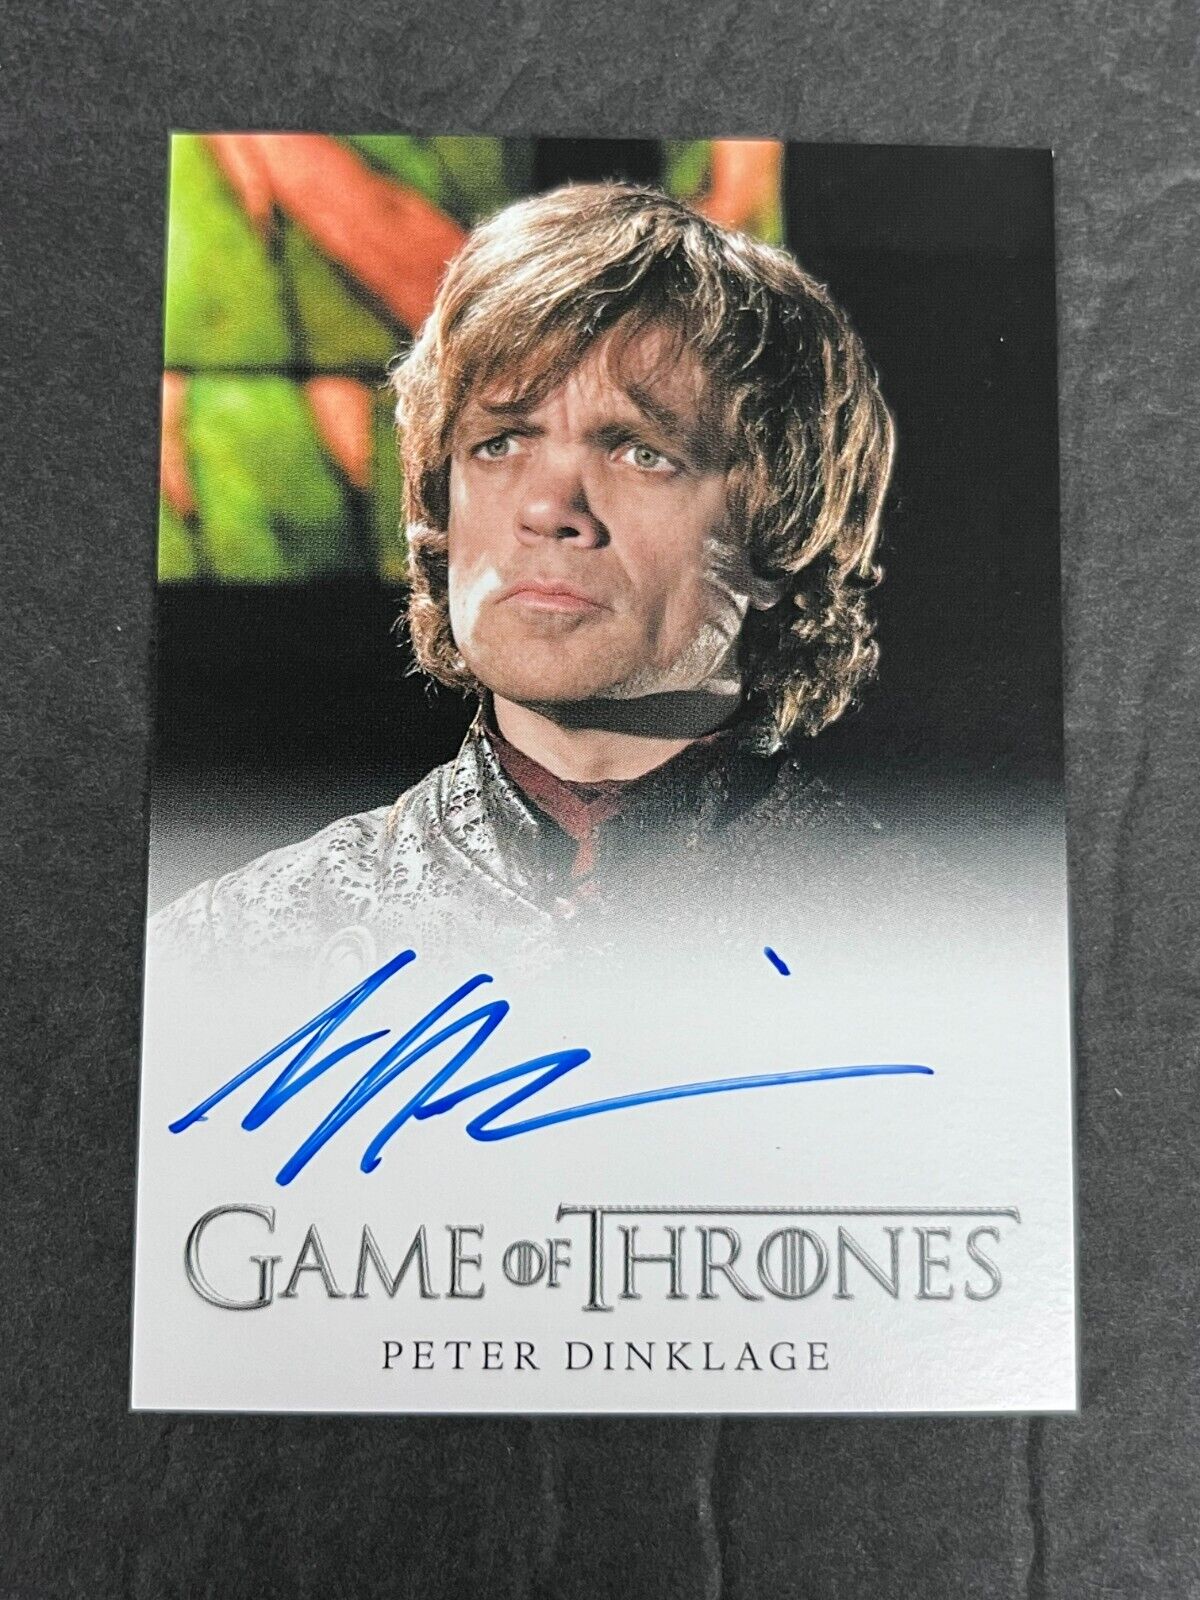 2012 Rittenhouse Game of Thrones Tyrion Lannister Peter Dinklage Auto Card AA